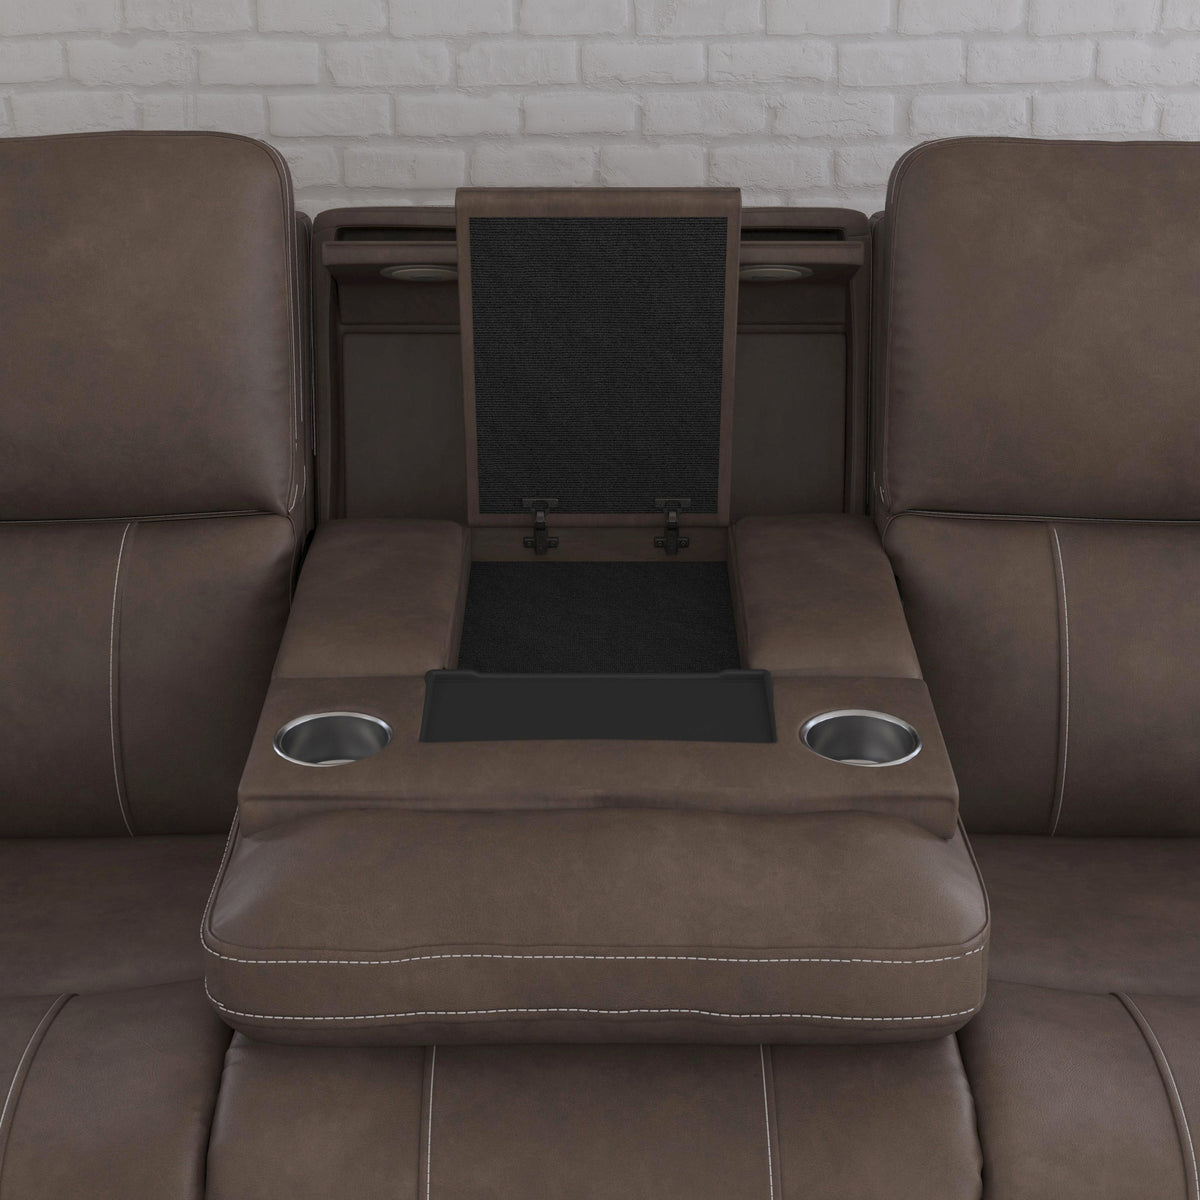 Power Reclining Sofa with Console & Power Headrests & Lumbar